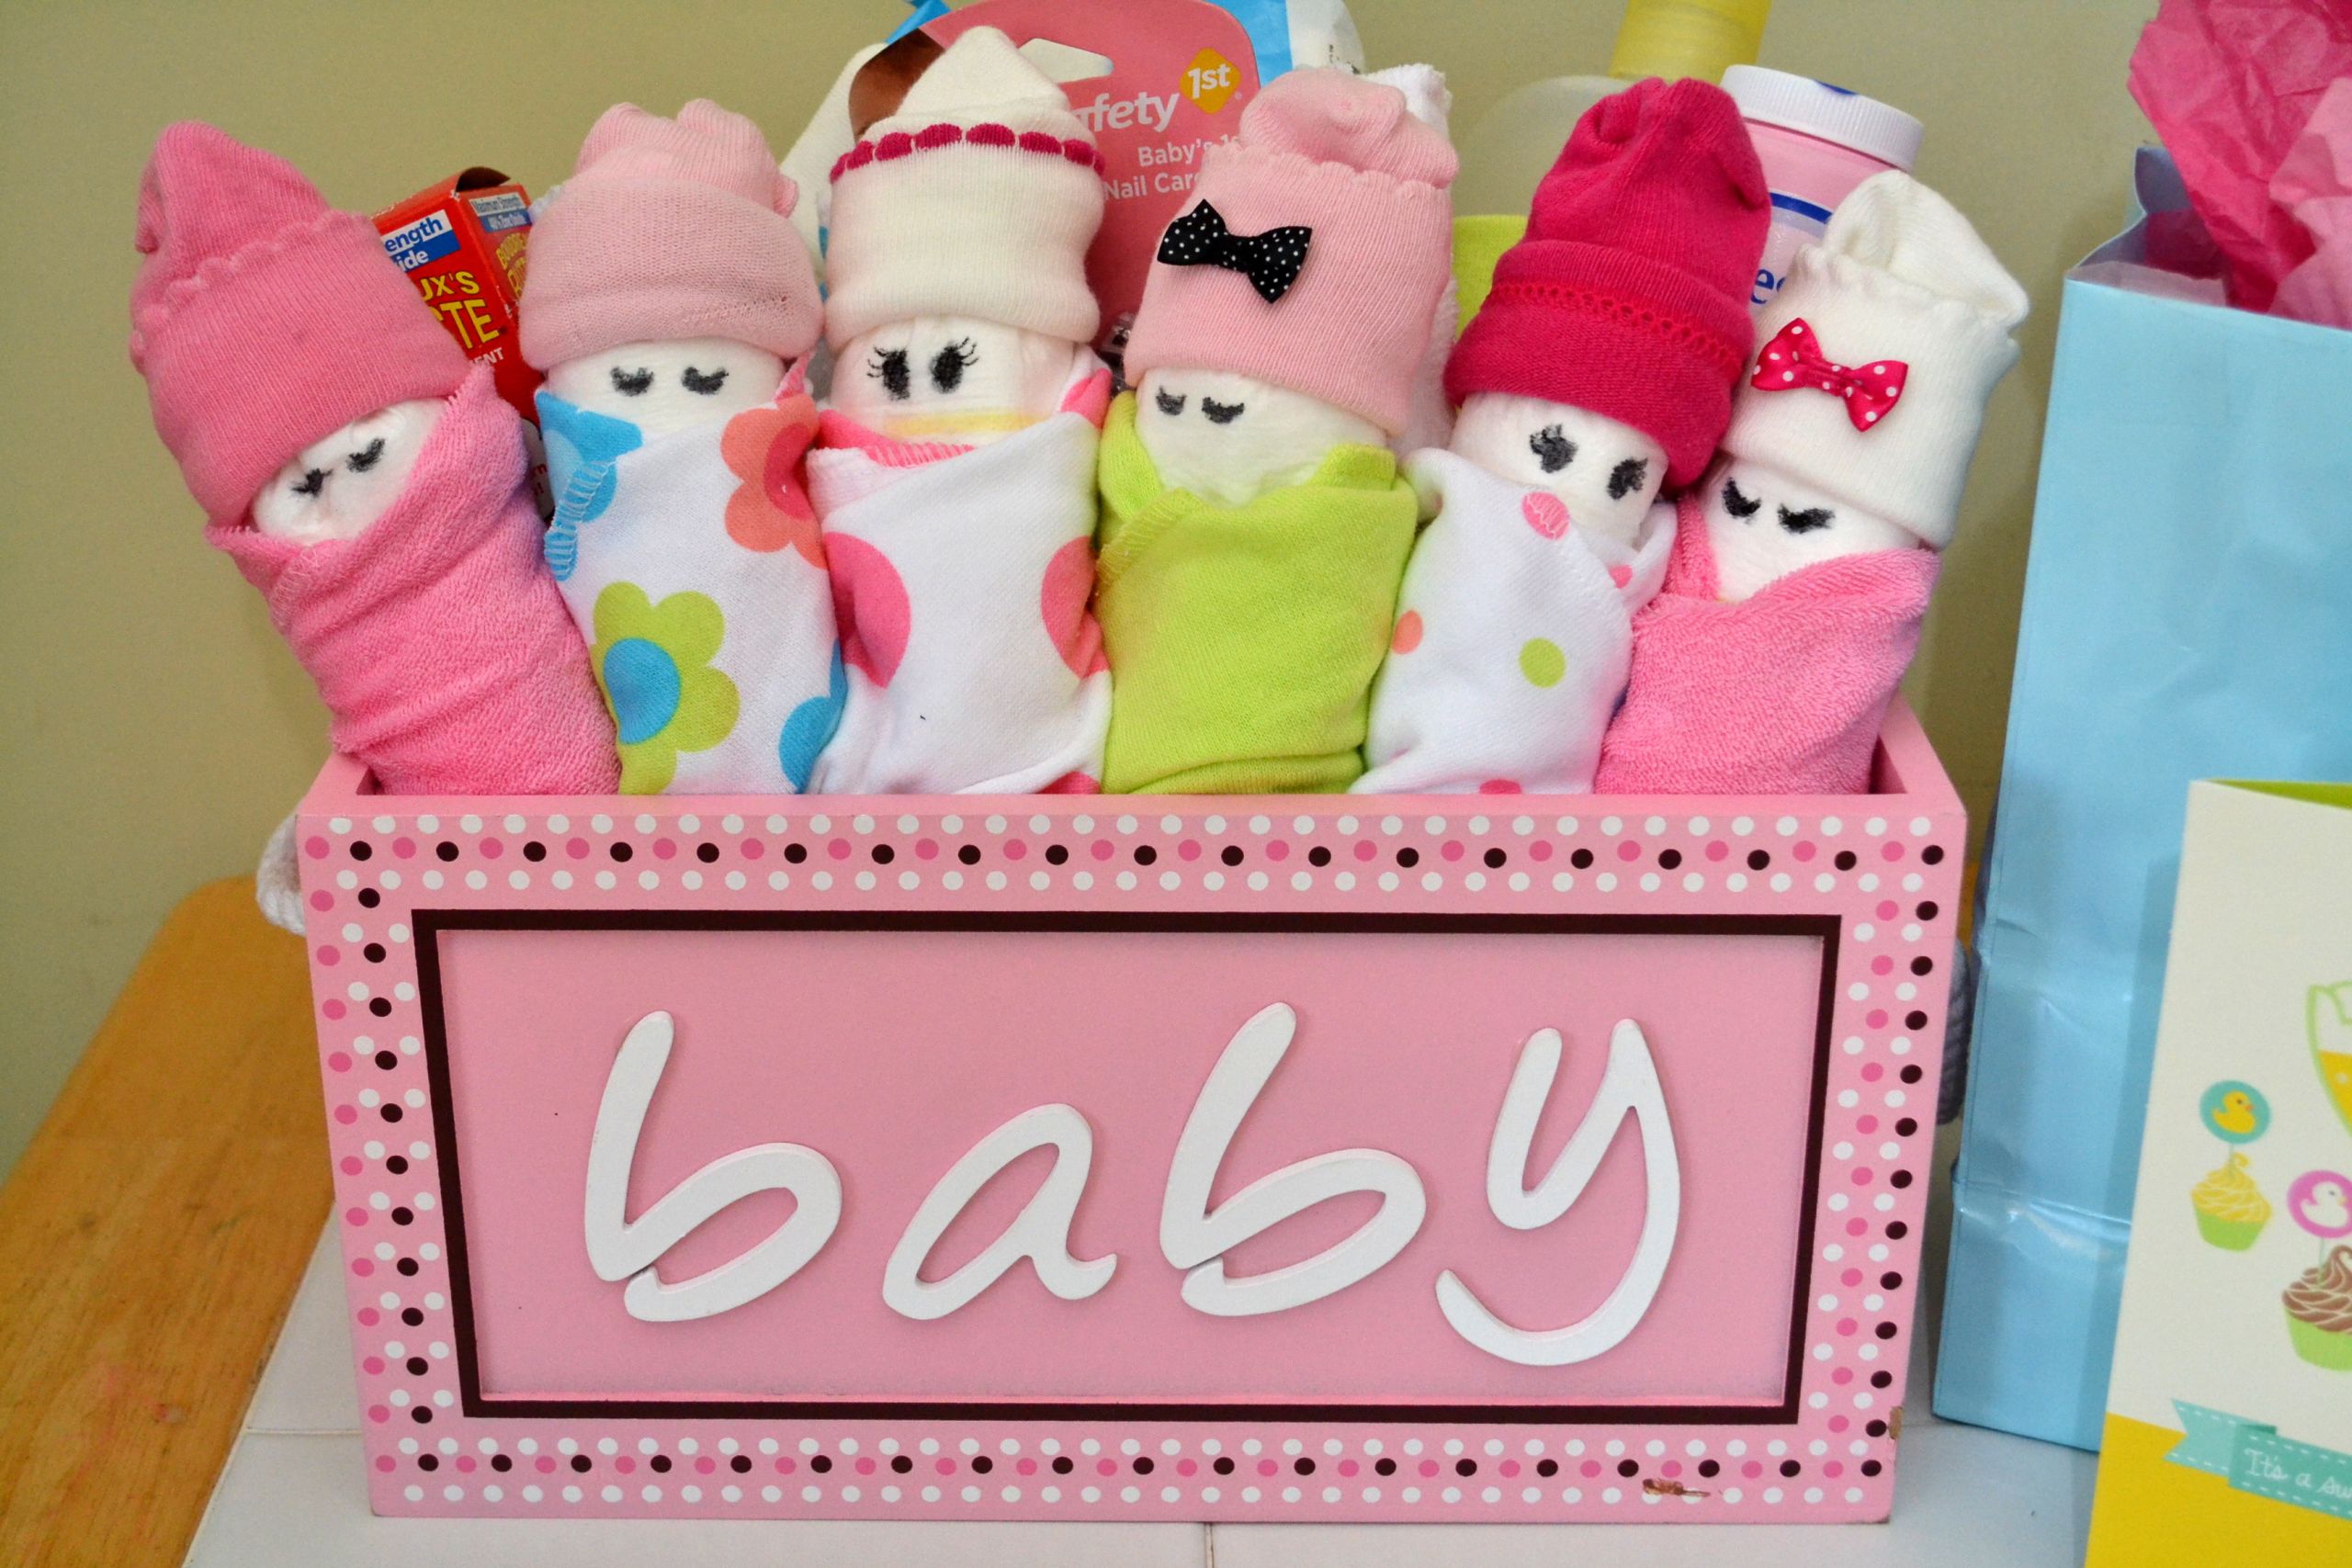 DIY Baby Gift Ideas
 Essential Baby Shower Gifts & DIY Diaper Babies